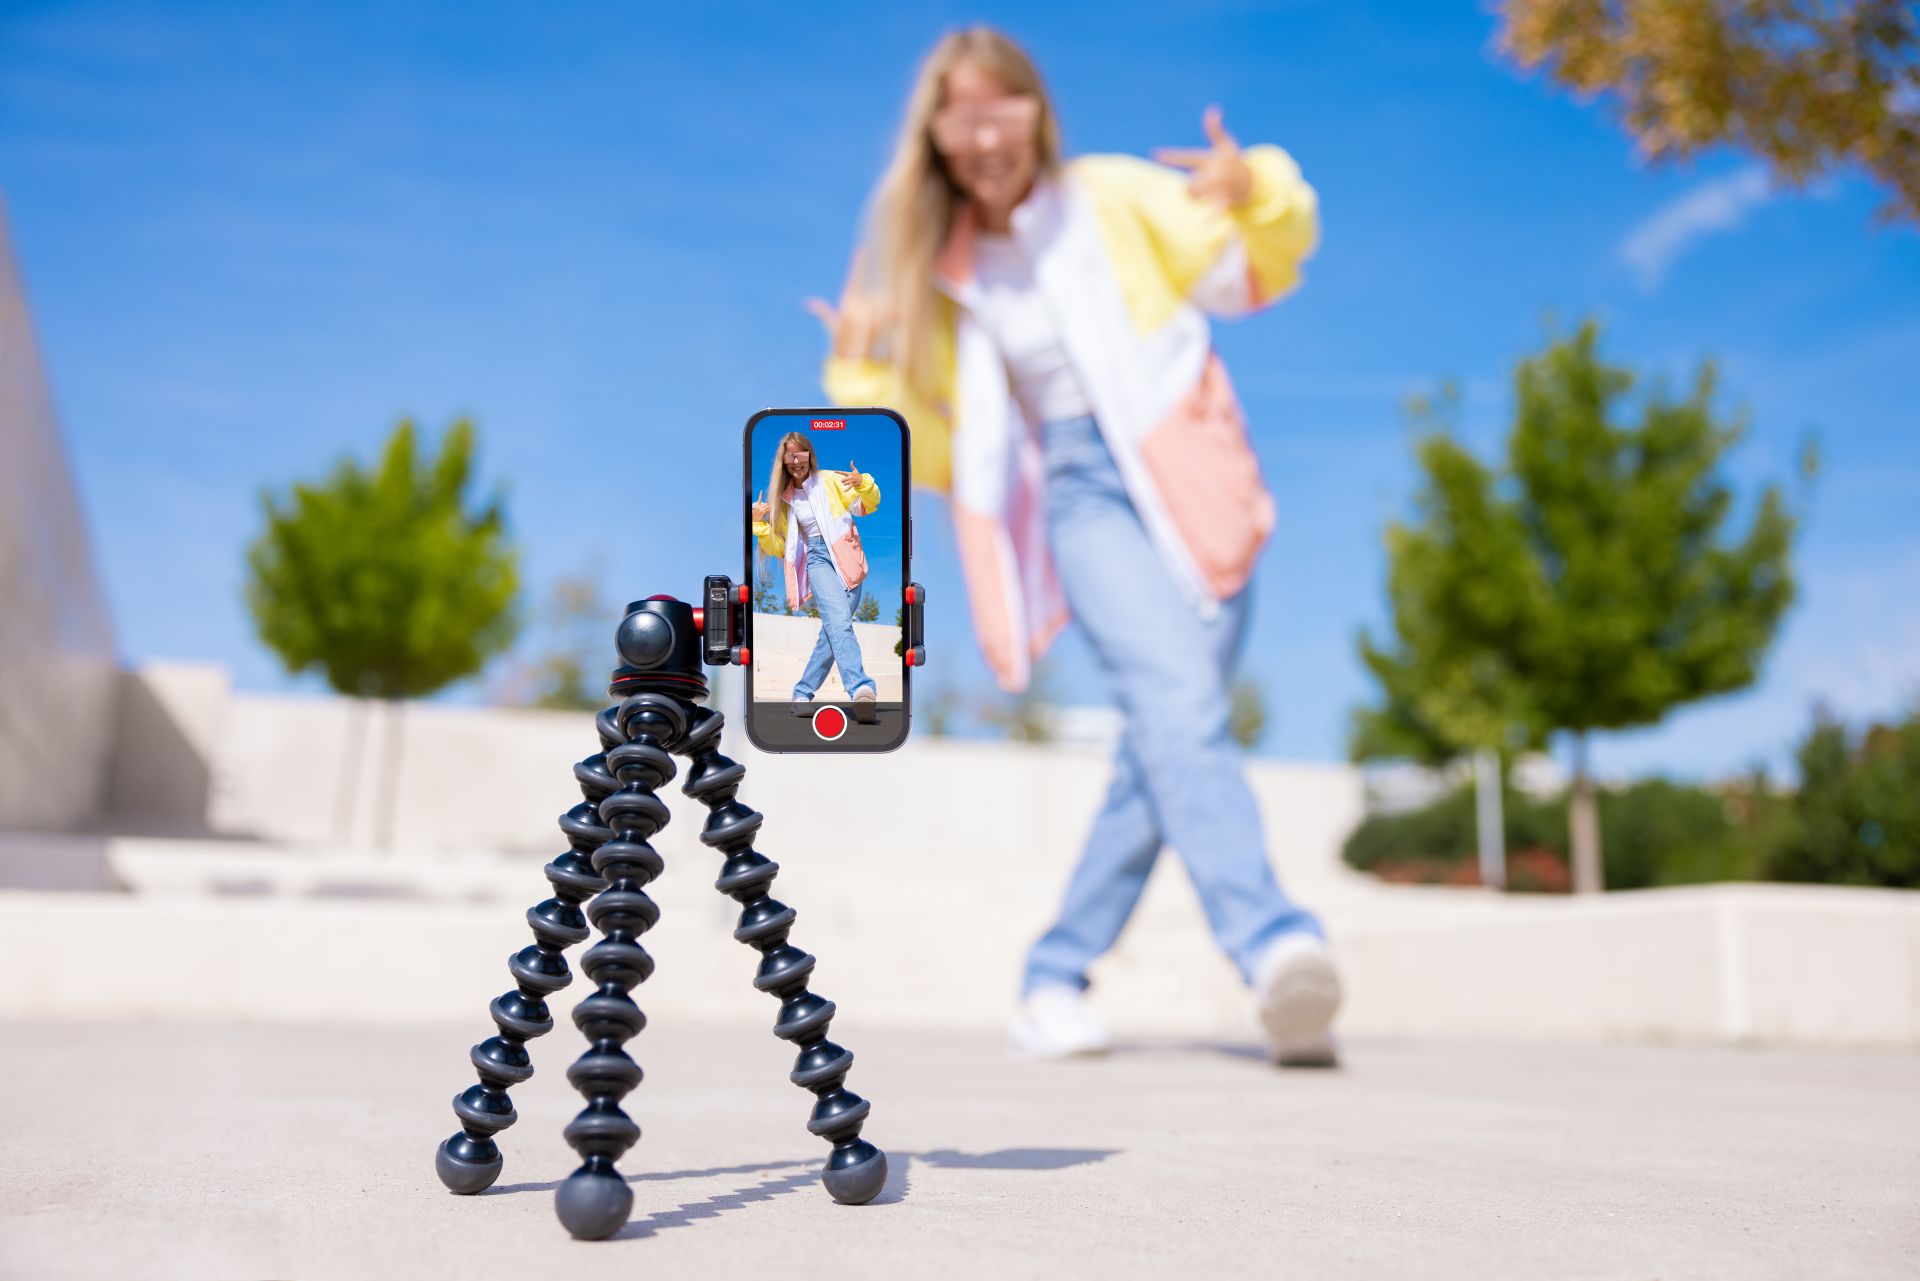 Teen girl posing for a phone camera on a tripod